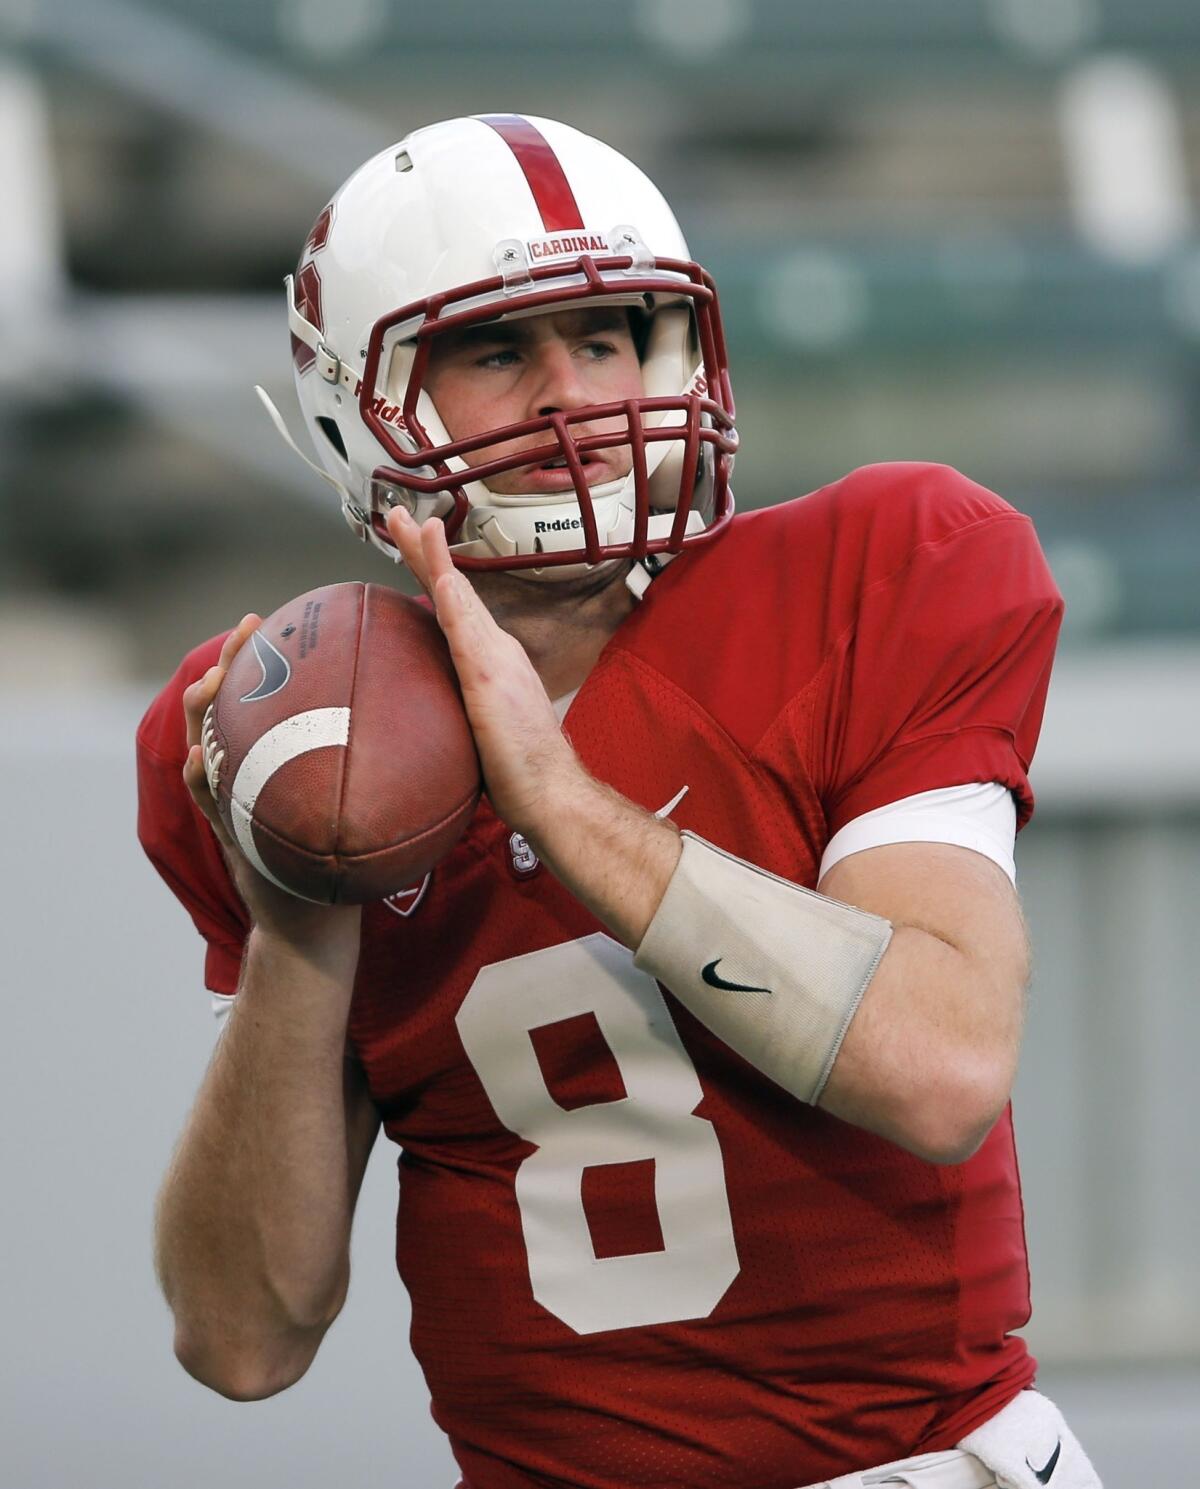 Stanford quarterback Kevin Hogan returns for the Cardinal after going 5-0 as a starter in 2012.